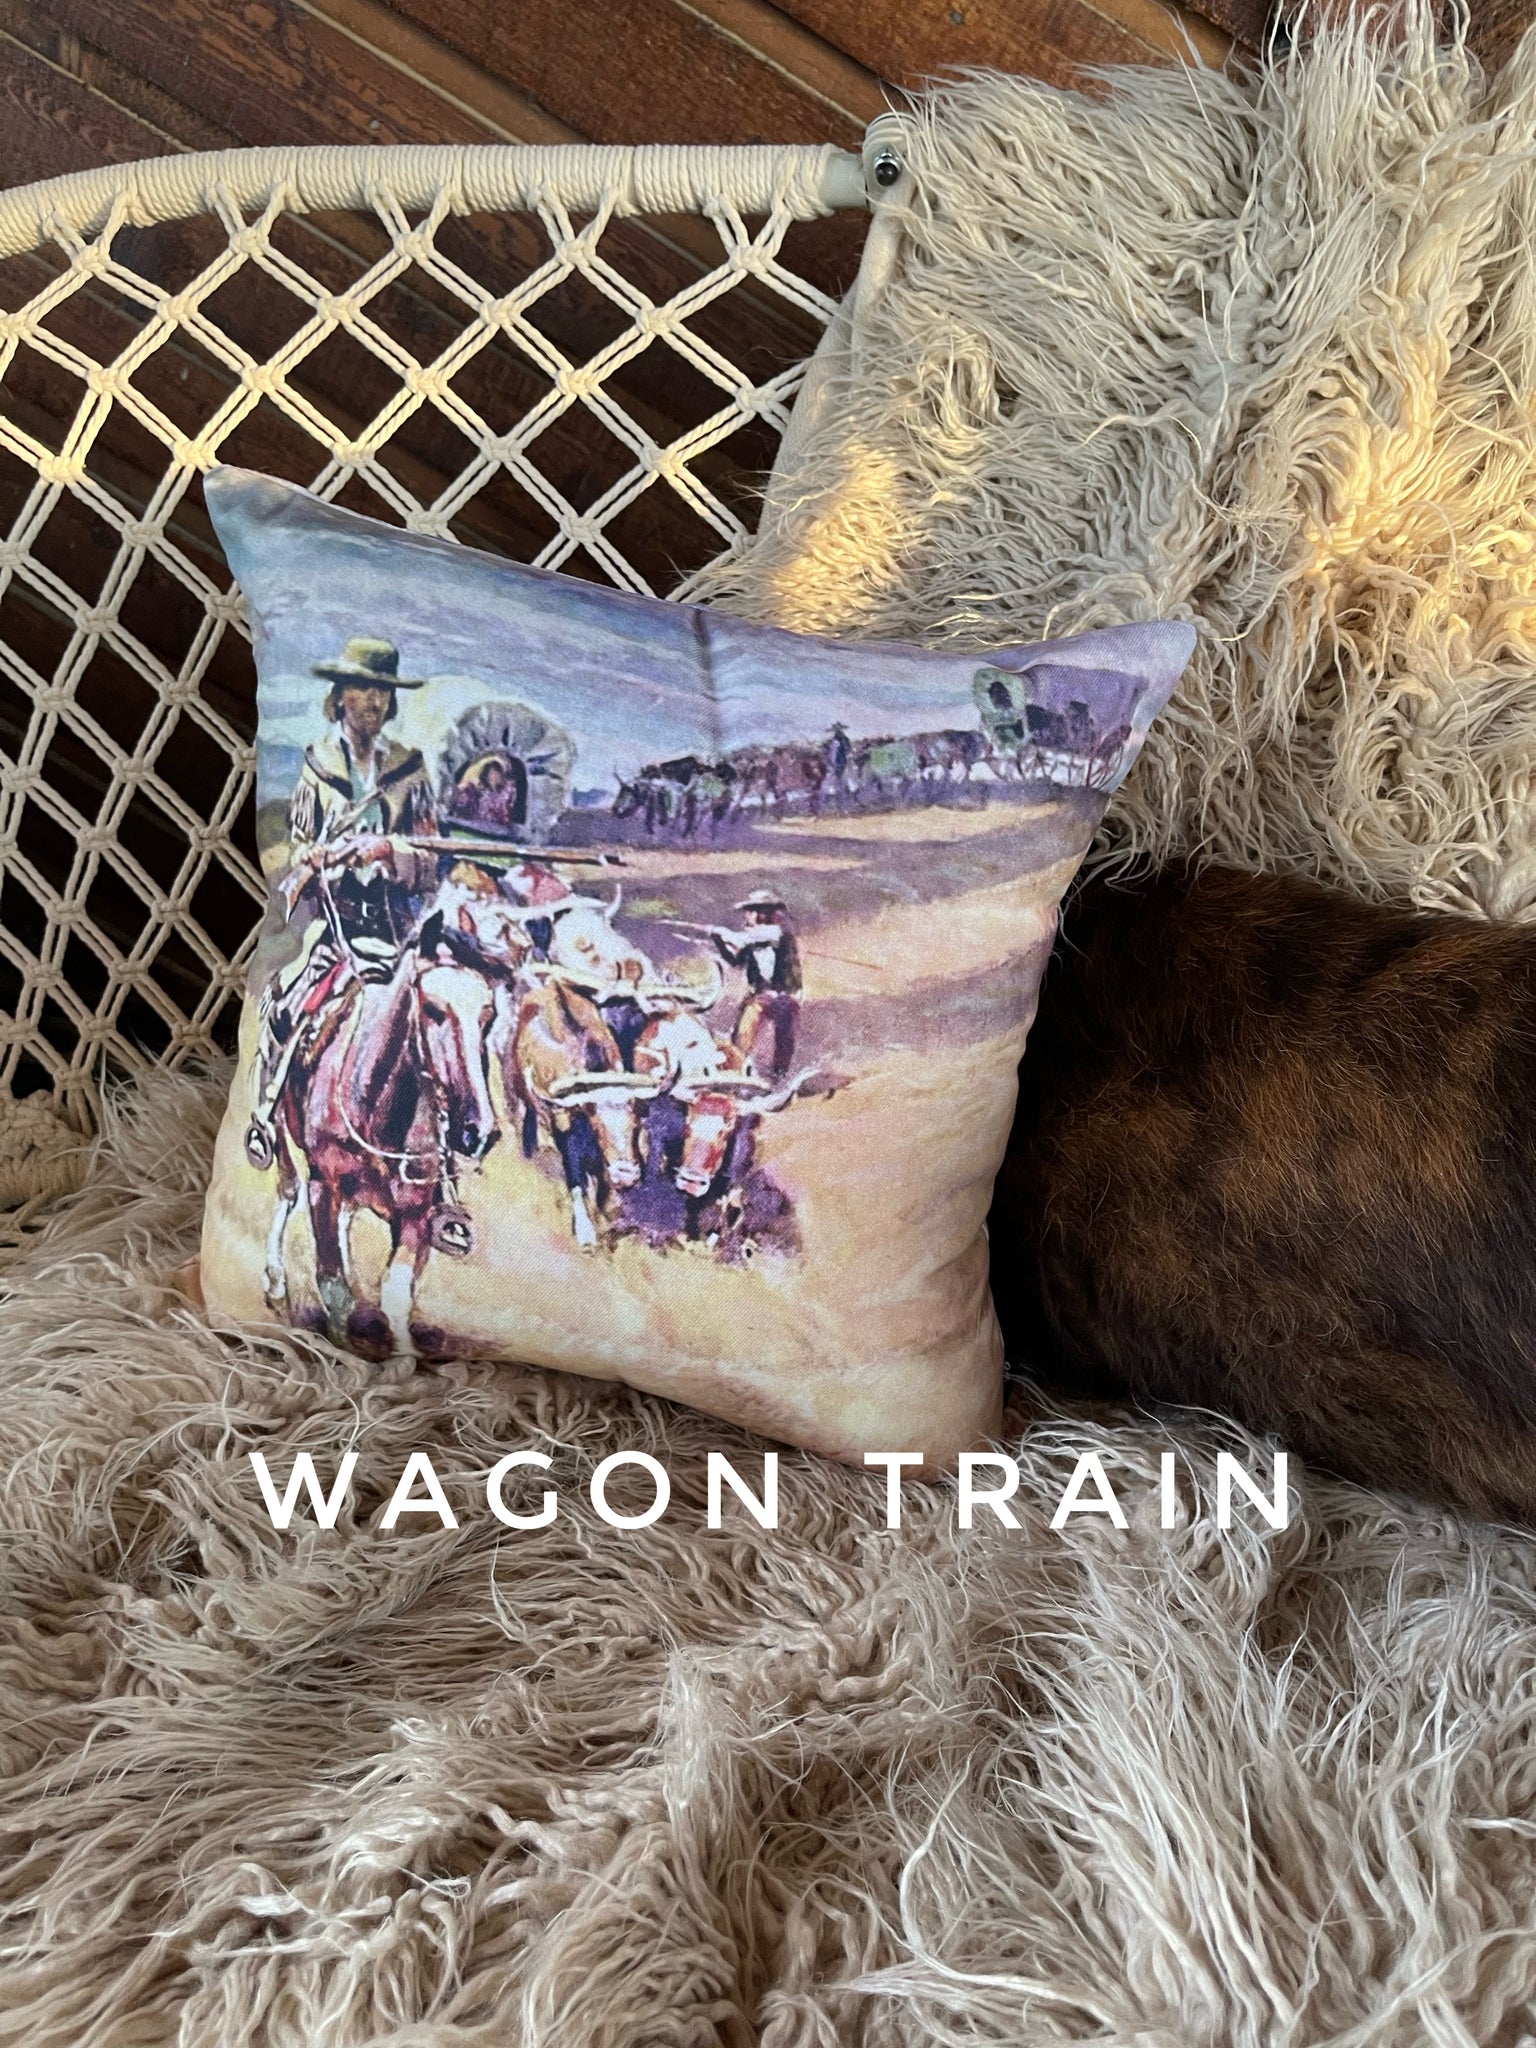 Alligator Accent Pillow – Western Passion